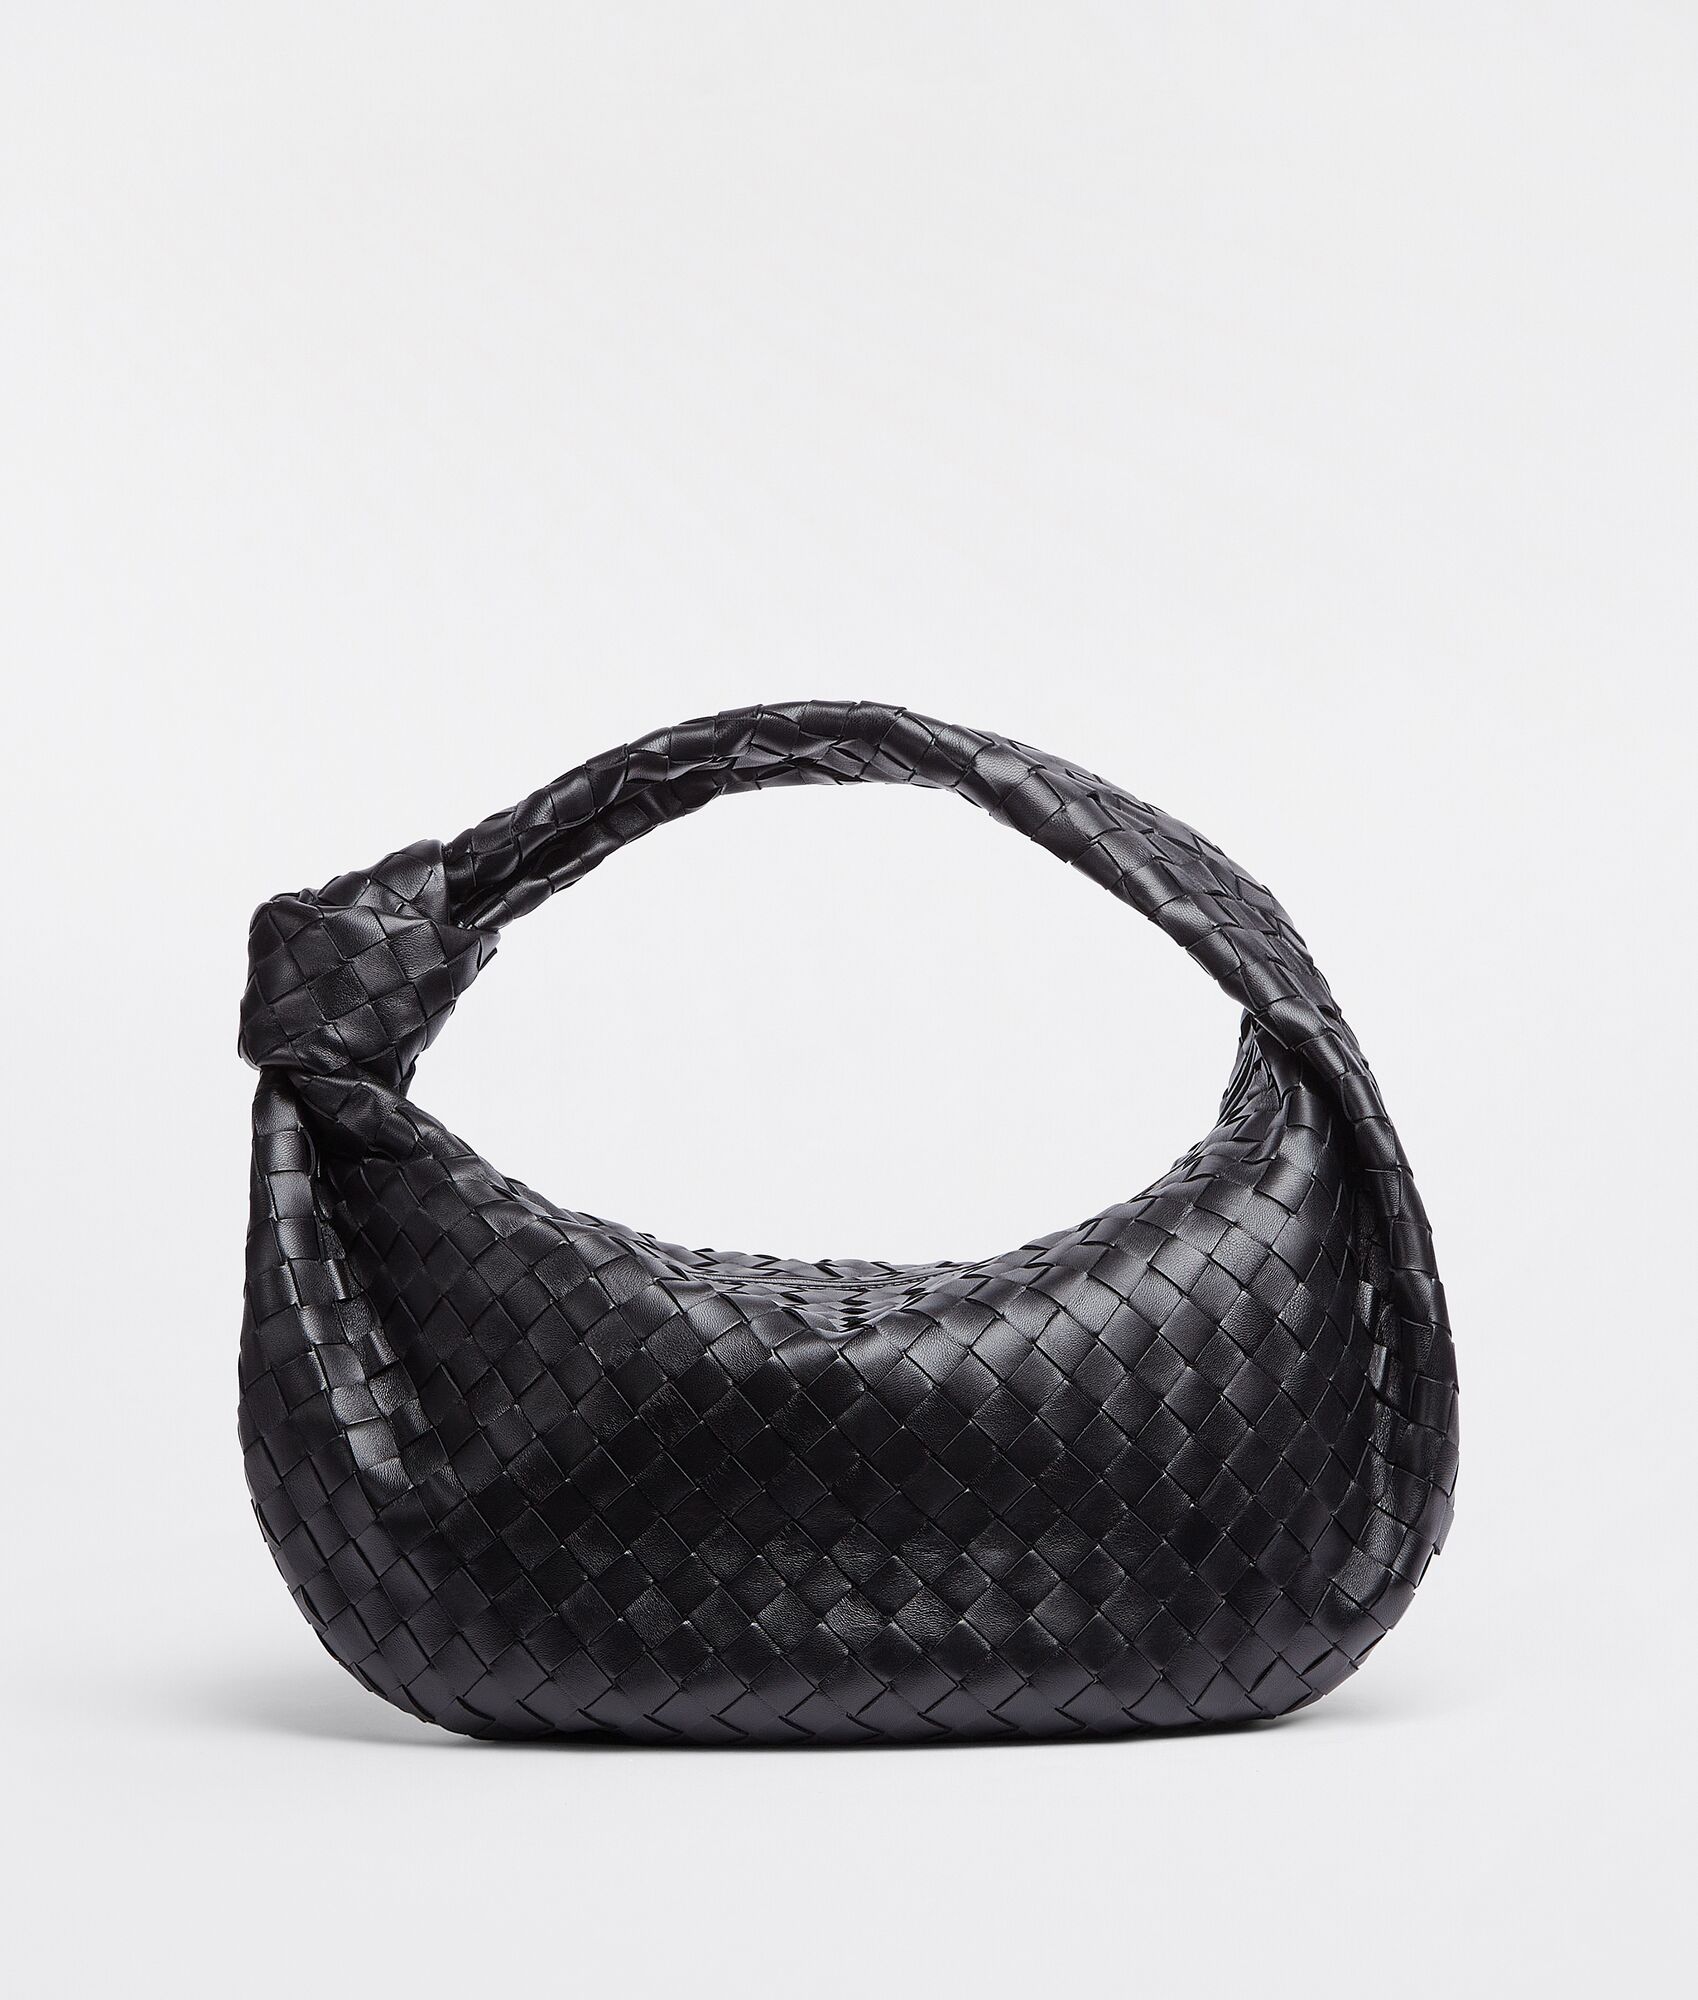 Small Jodie by Bottega Veneta, available on small-jodie-black-809123906.html for $4100 Hailey Baldwin Bags Exact Product 